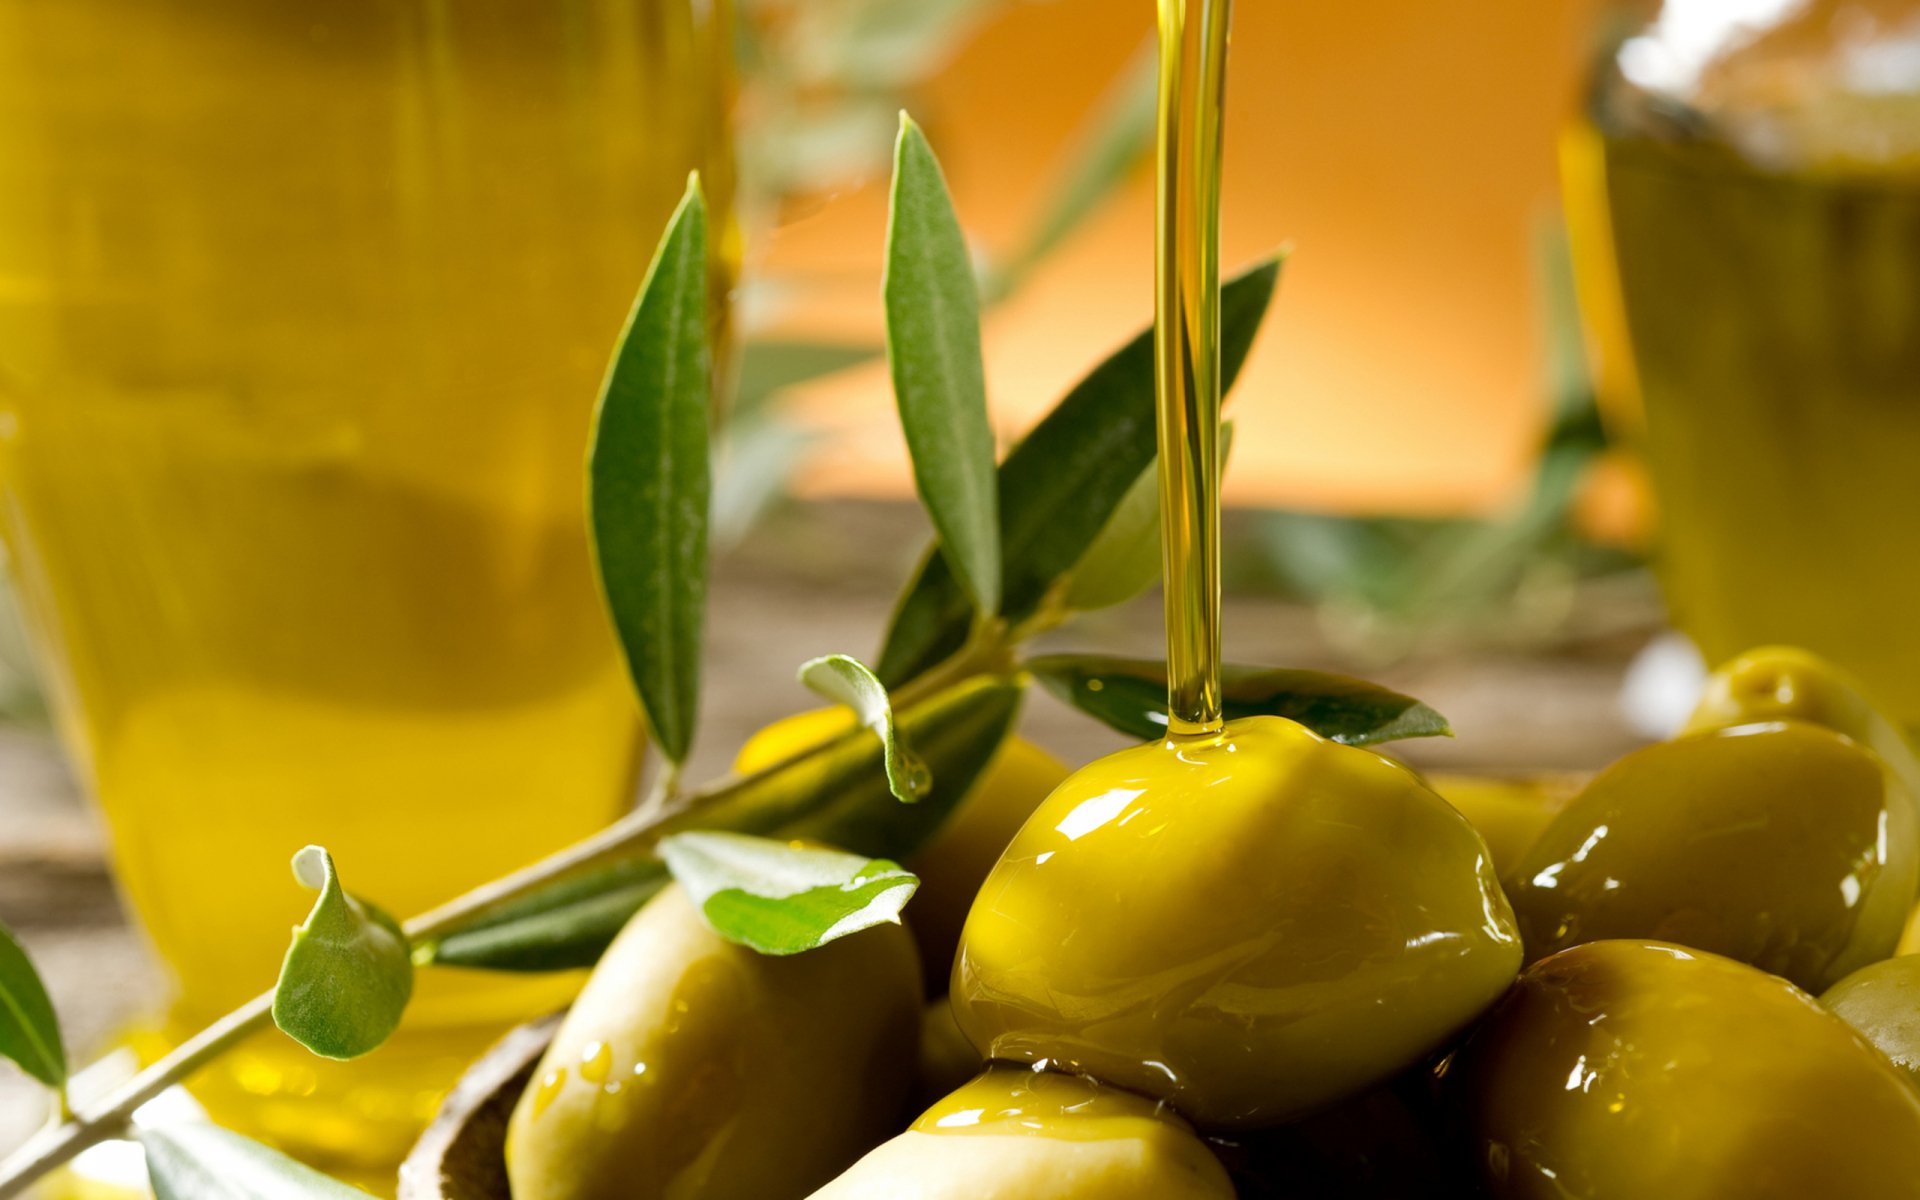 10 Olive Hd Wallpapers And Backgrounds